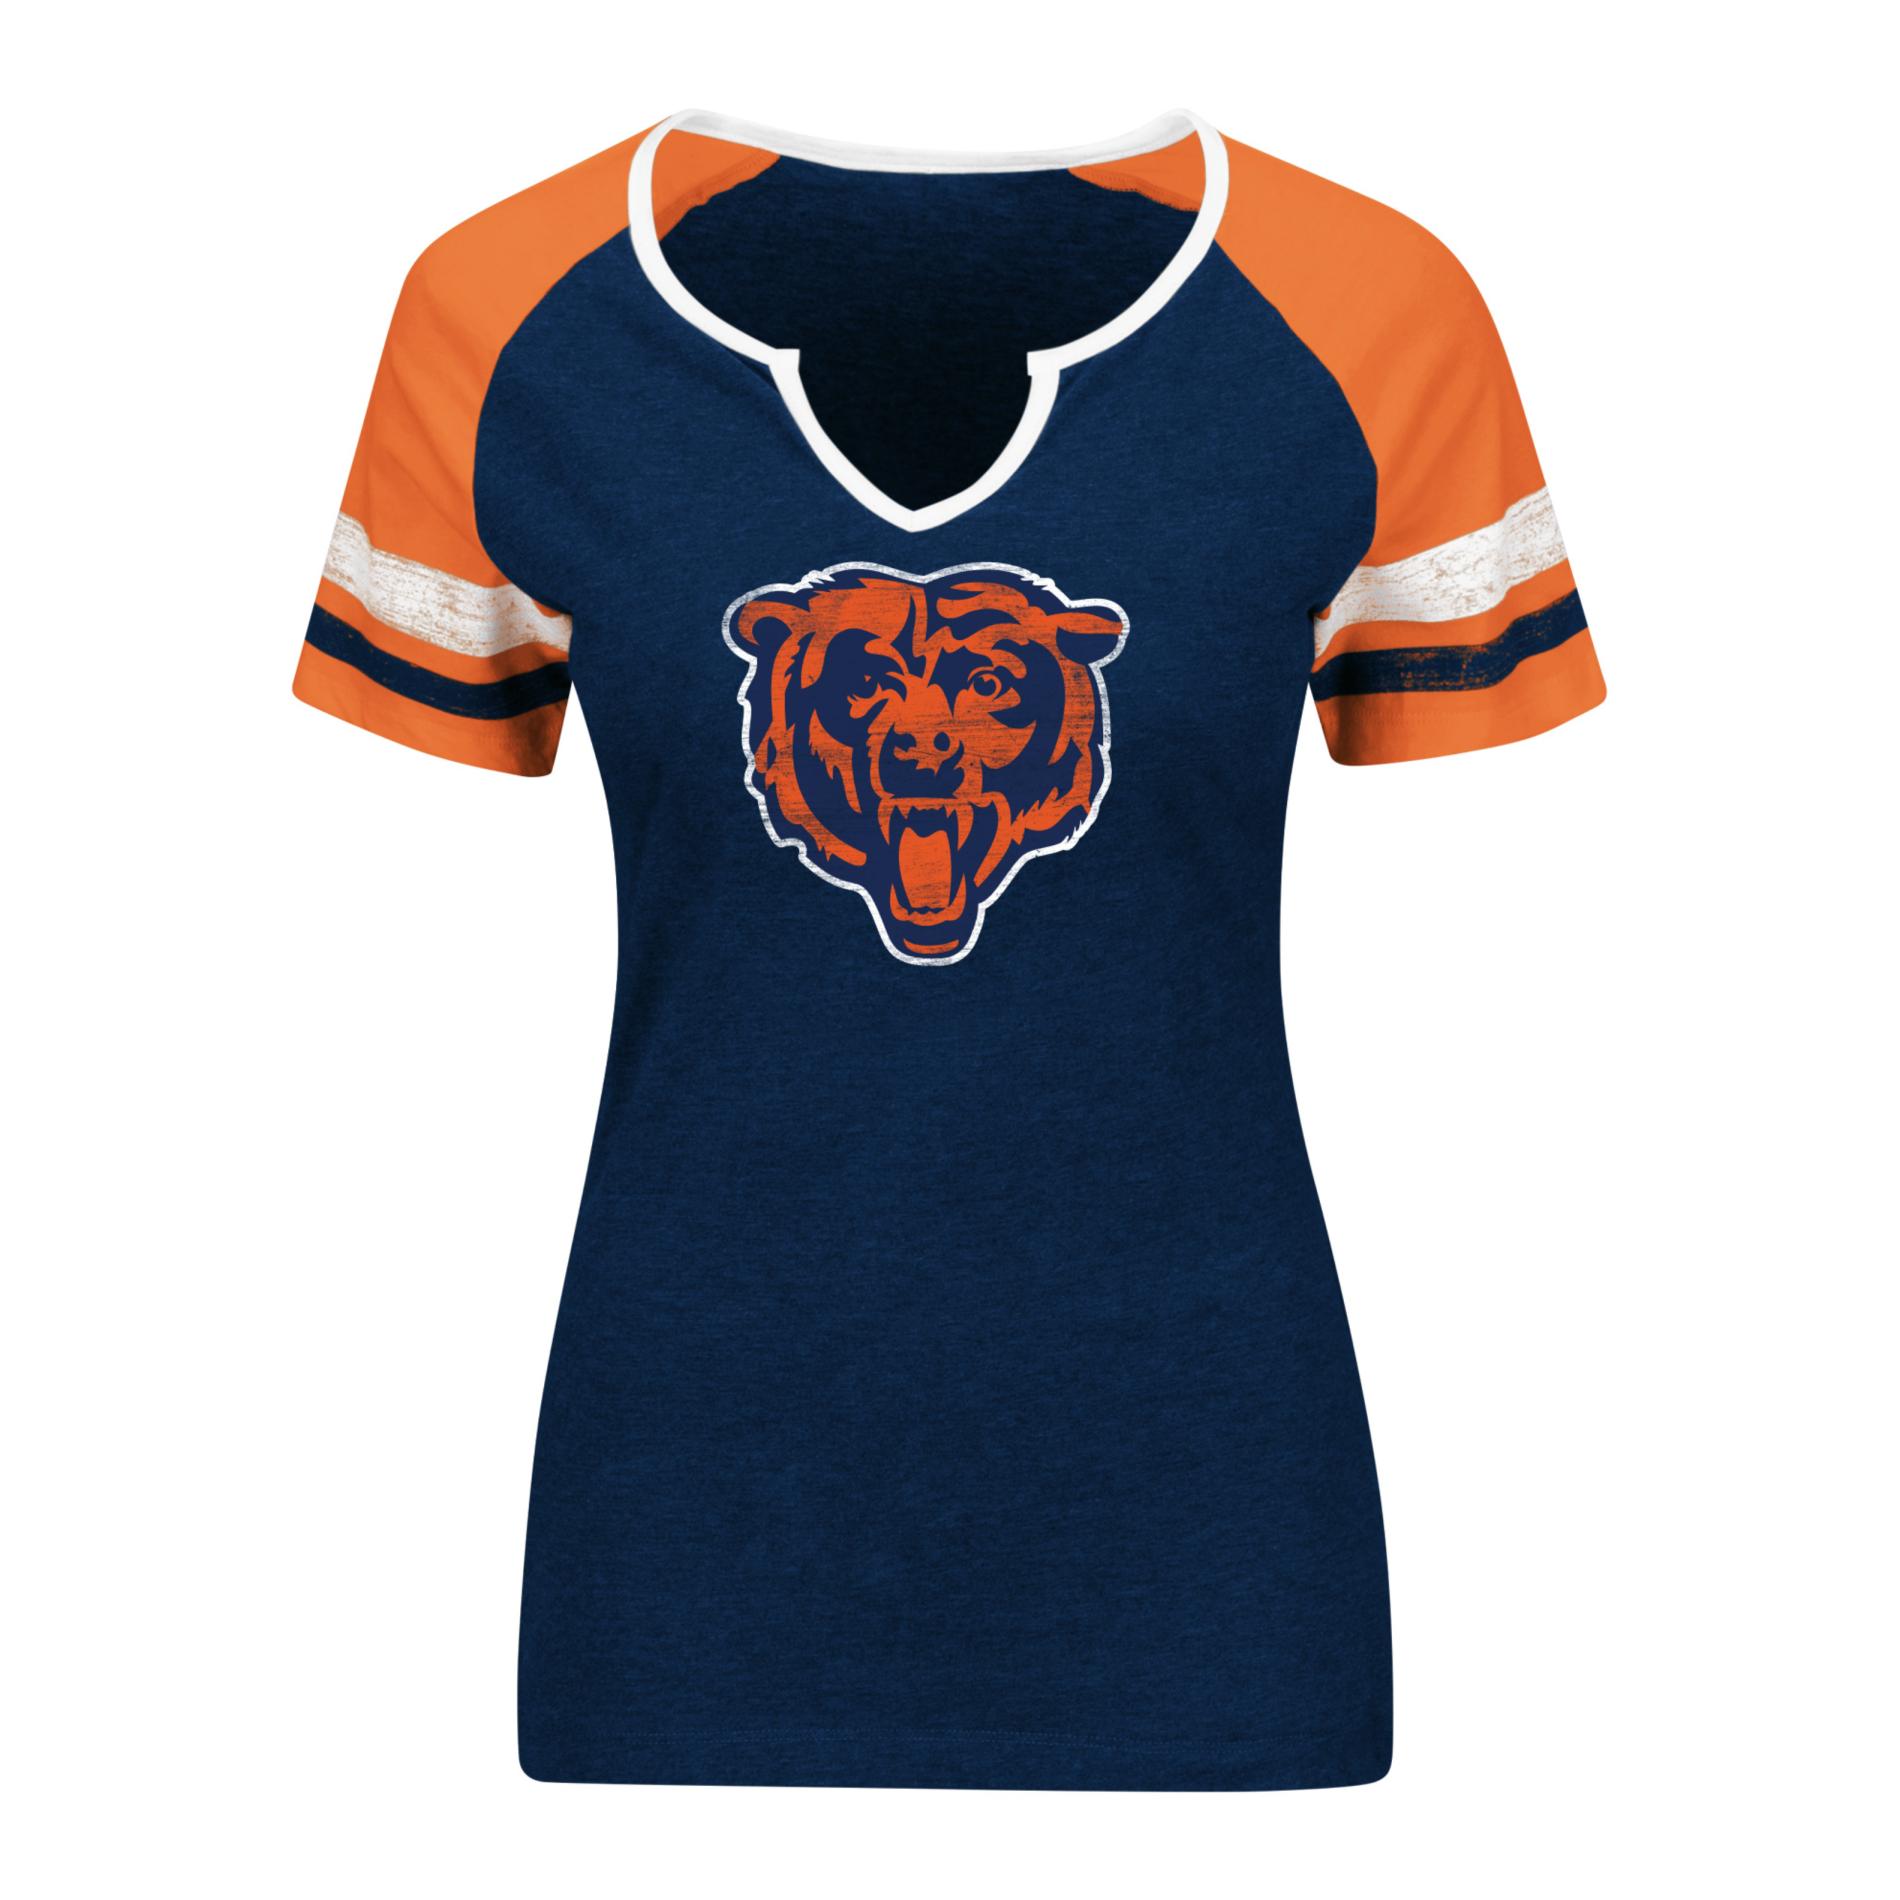 NFL Women's Notched Neck Graphic T-Shirt - Chicago Bears